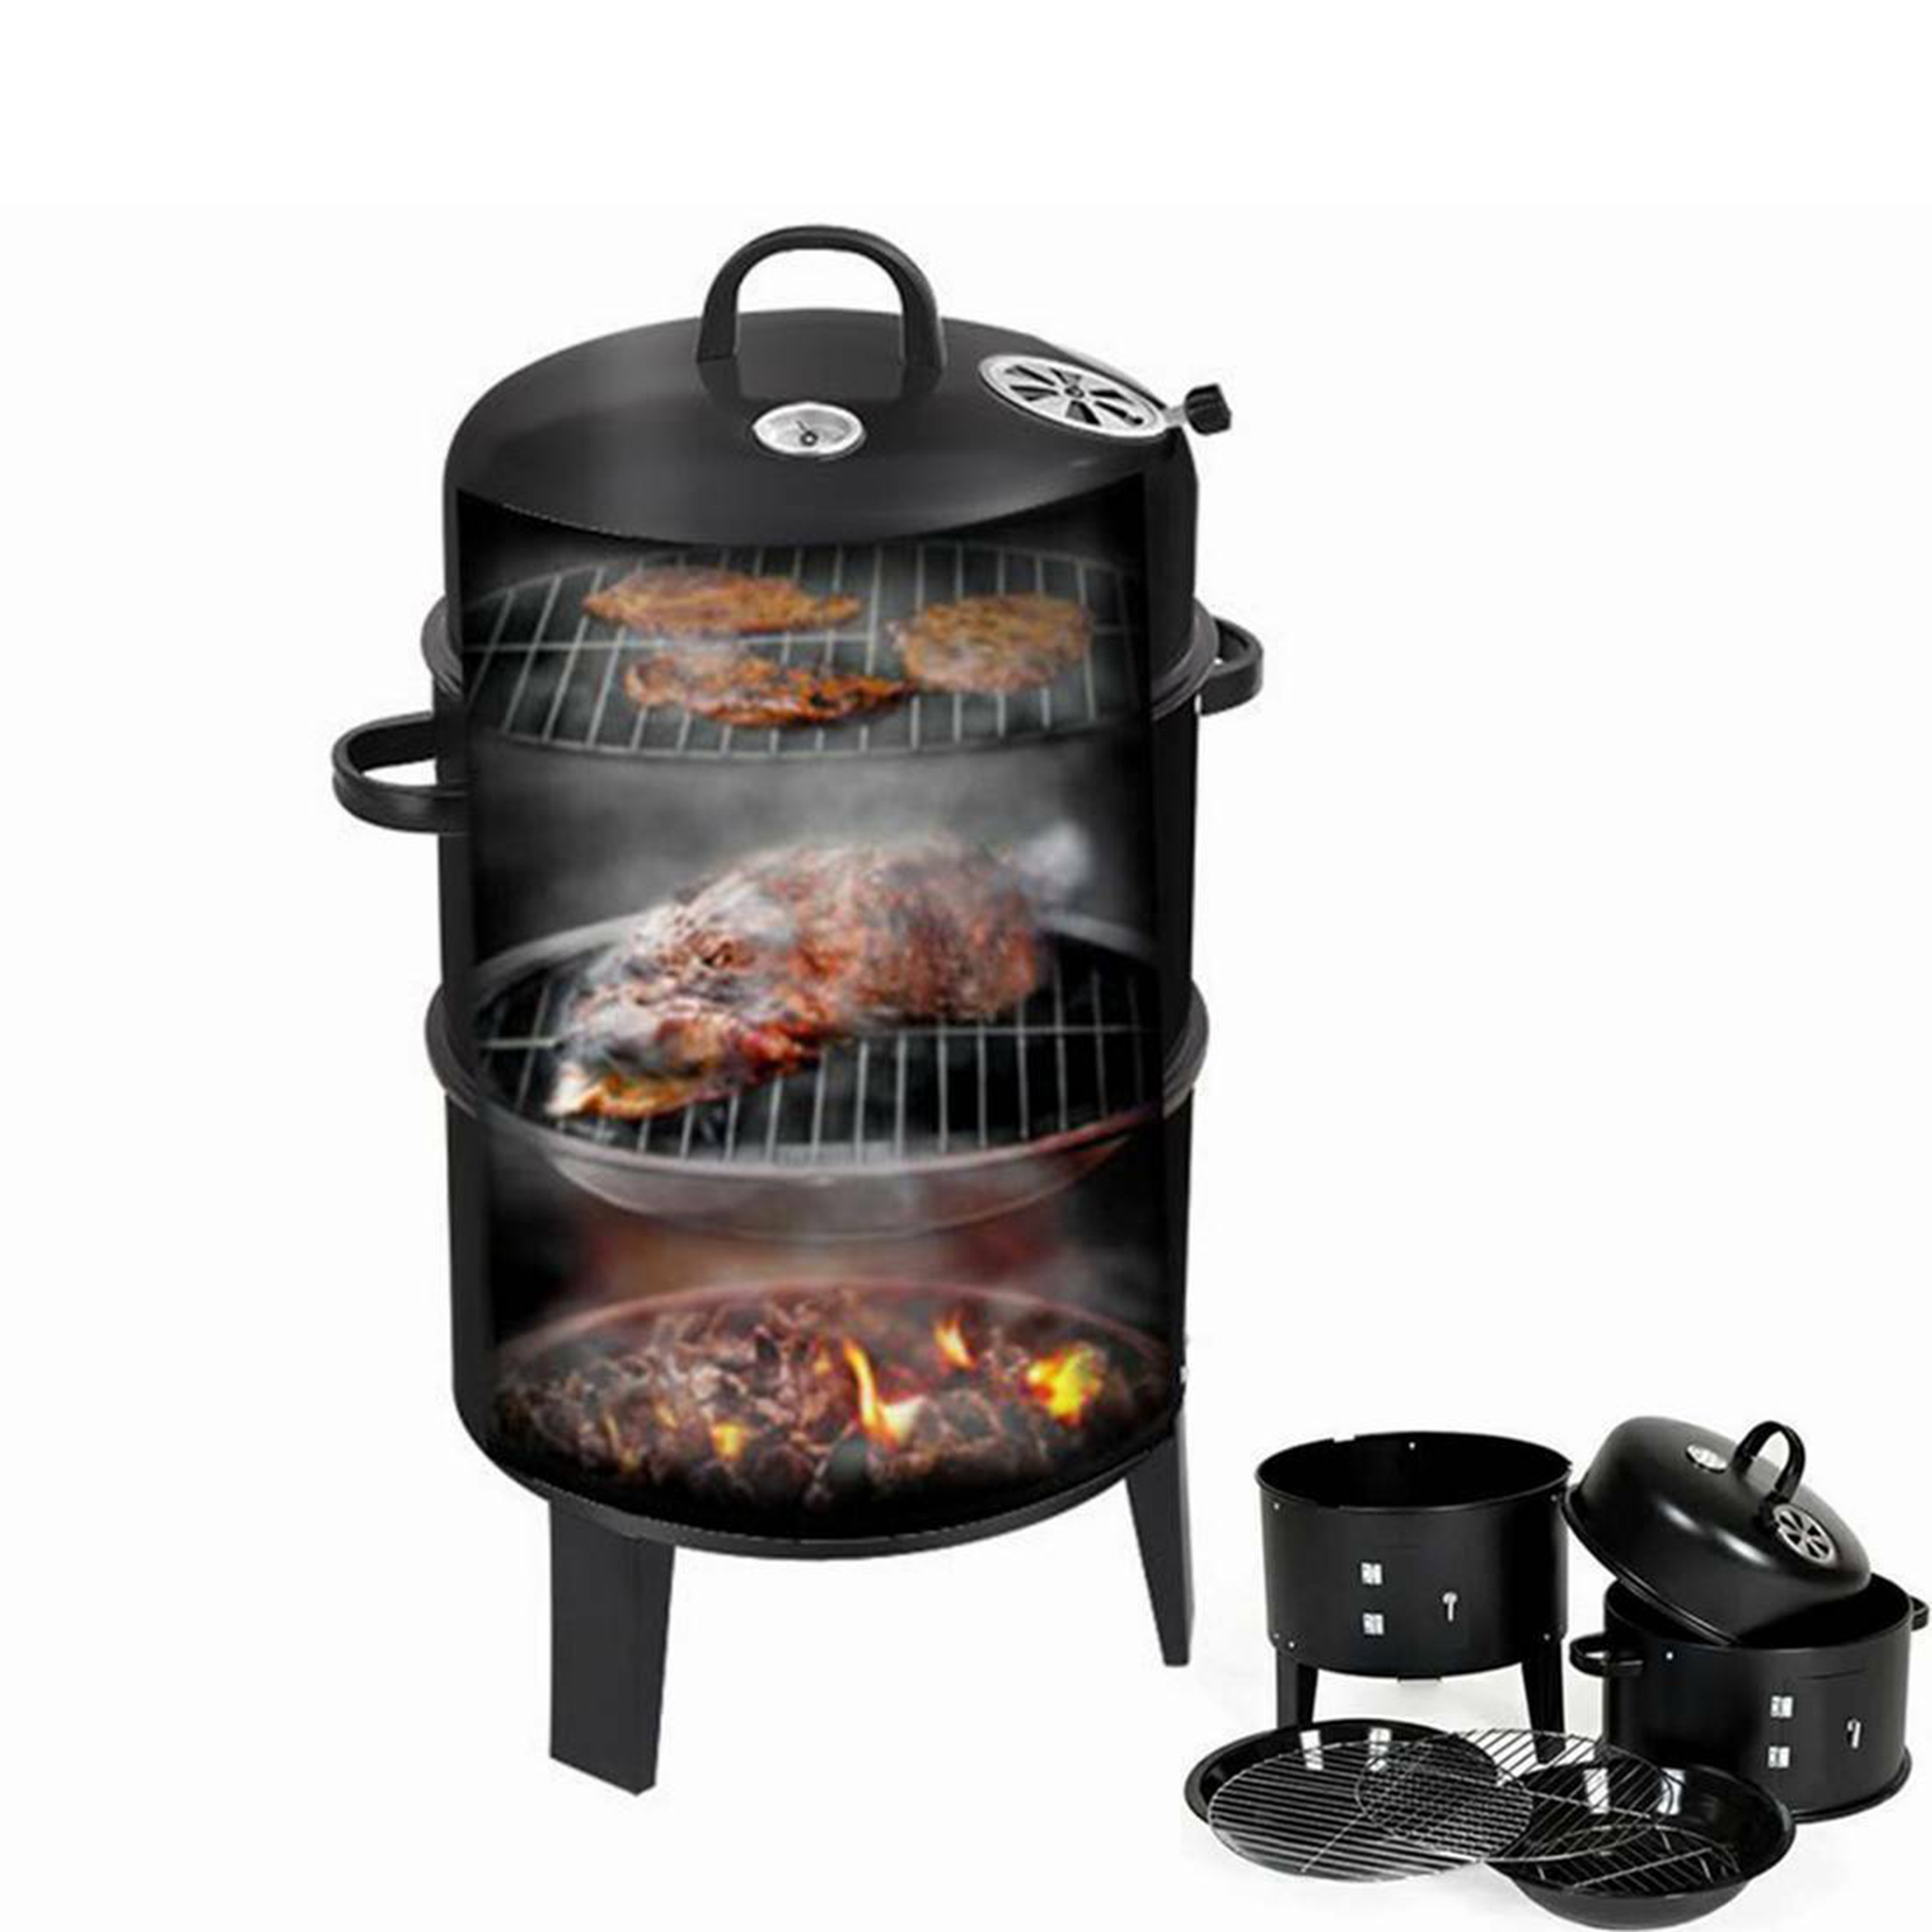 LELINTA Vertical Charcoal BBQ Smoker, 3-in-1 Vertical Offset Charcoal Smoker & Grill Steel BBQ Grill - Built in Thermometer & Adjustable Air Vent for Outdoor Picnic, Camping - image 1 of 8